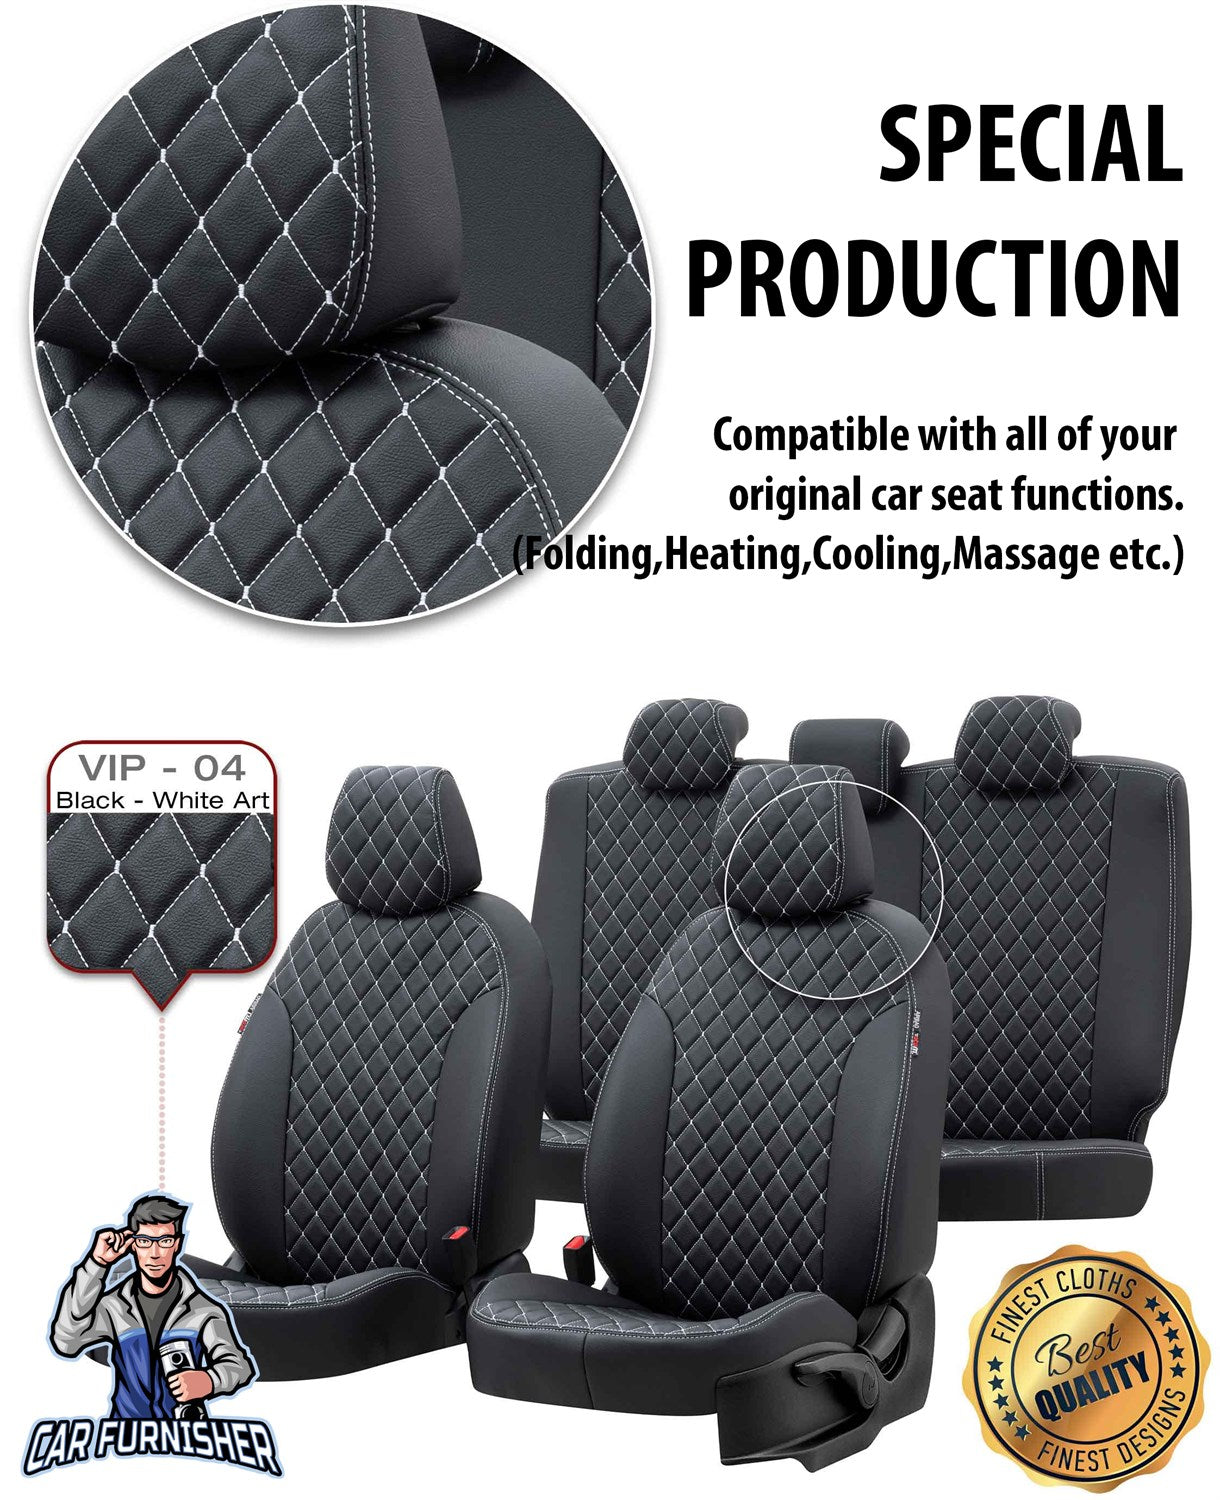 Geely Emgrand Seat Covers Madrid Leather Design Blue Leather